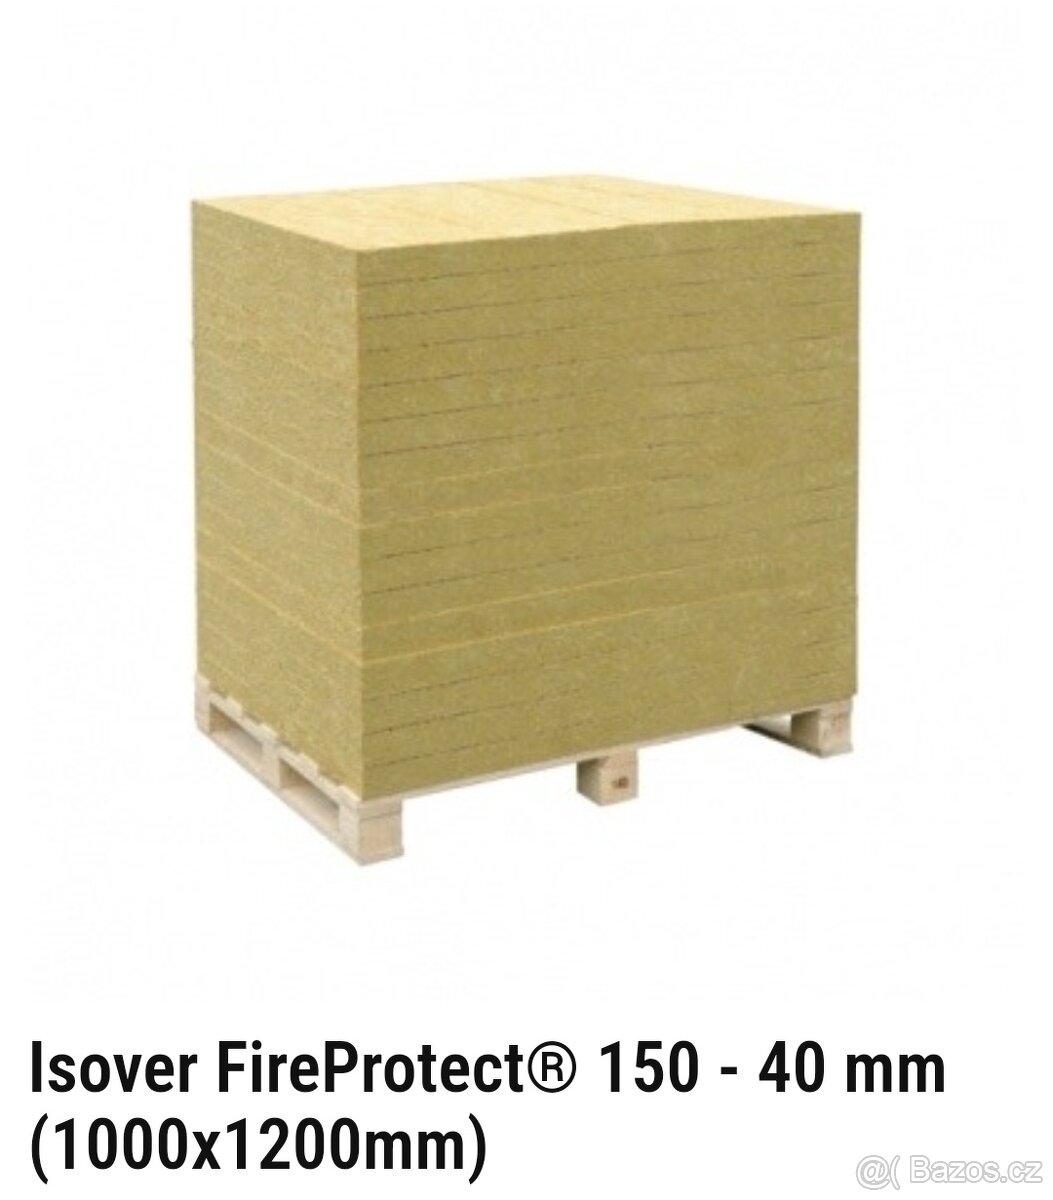 Isover FireProtect® 150 - 40 mm